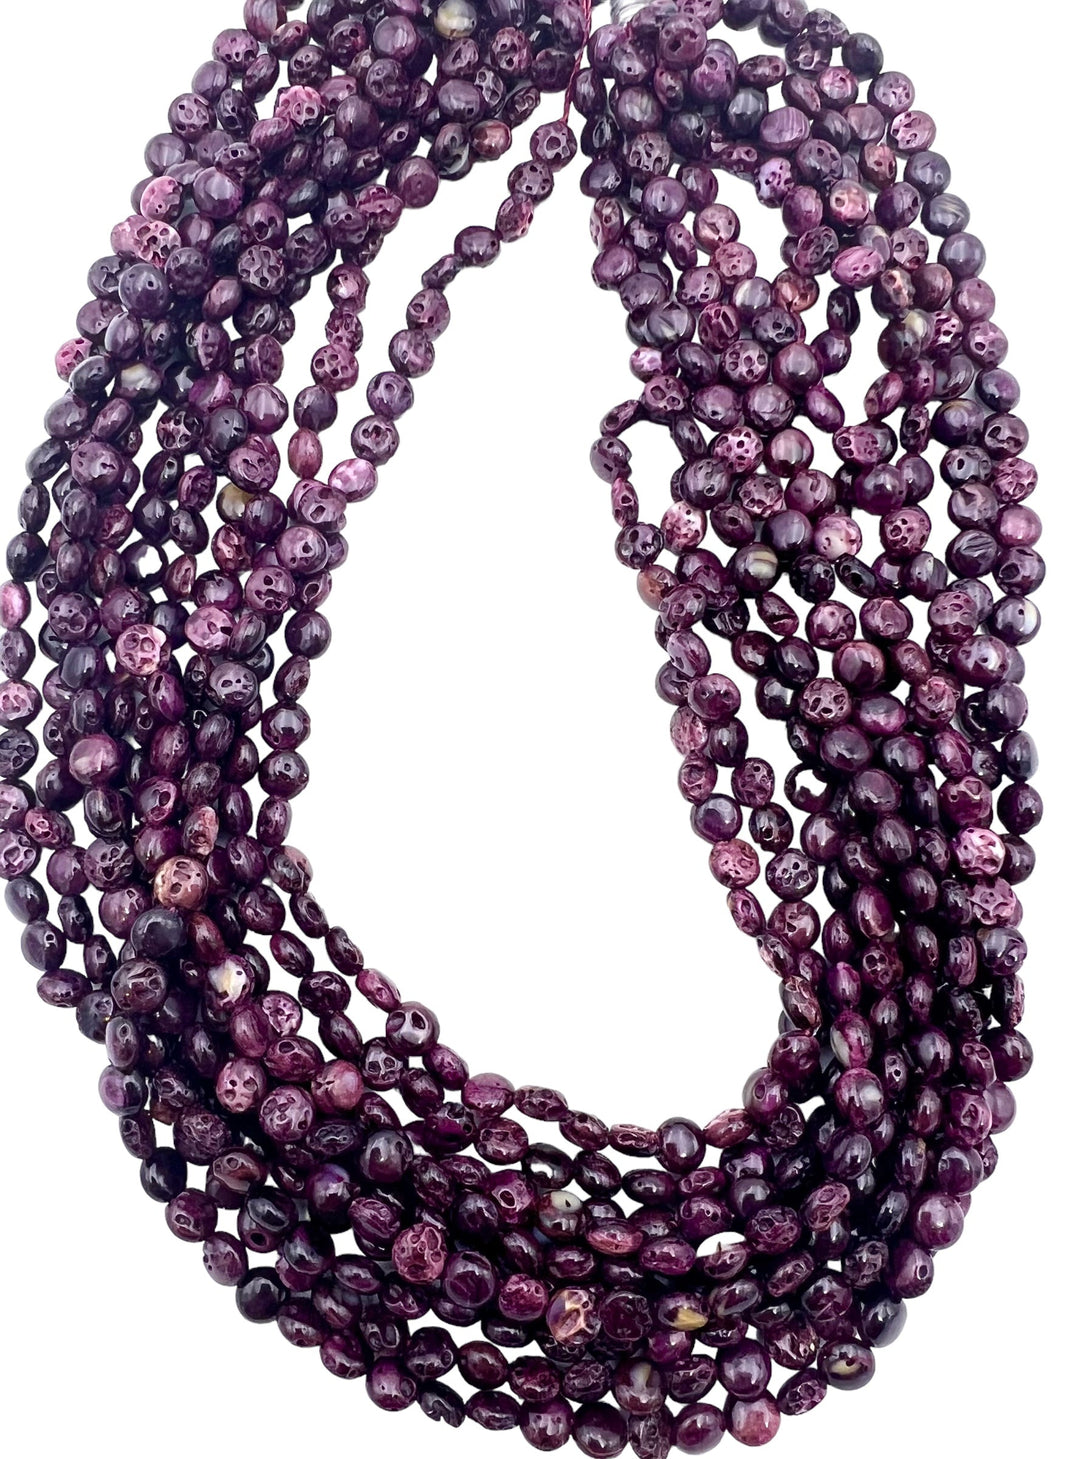 RARE Dark Purple Spiny Oyster 6mm Coin Shaped Beads 16 inch